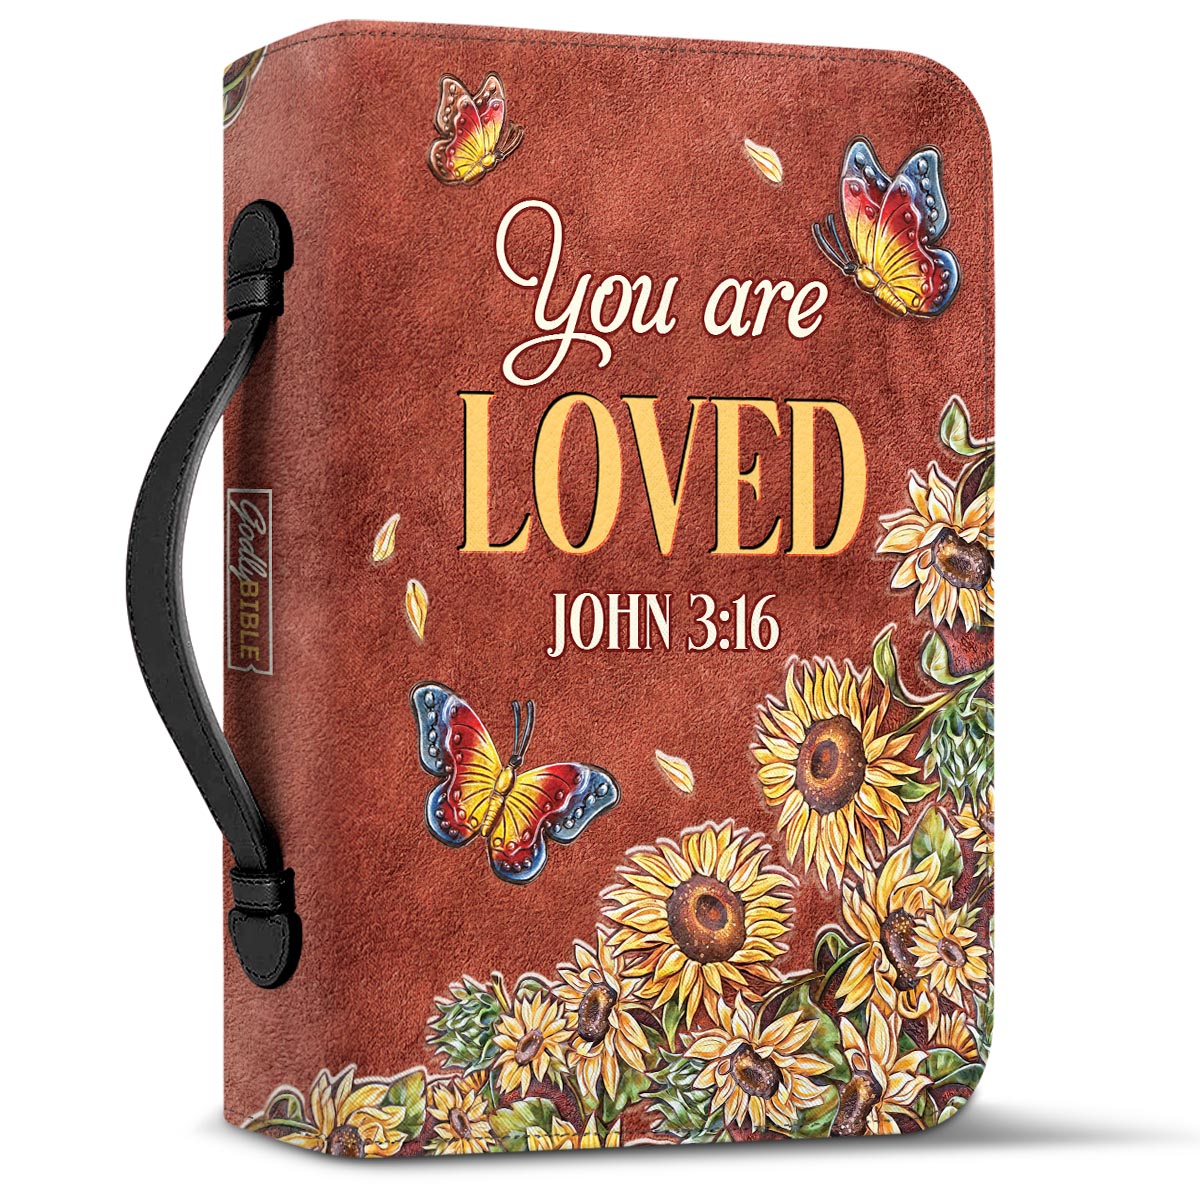 You Are Loved John 3 16 Butterfly Sunflower Leather Style Personalized Bible Cover - Pastor's Bible Covers